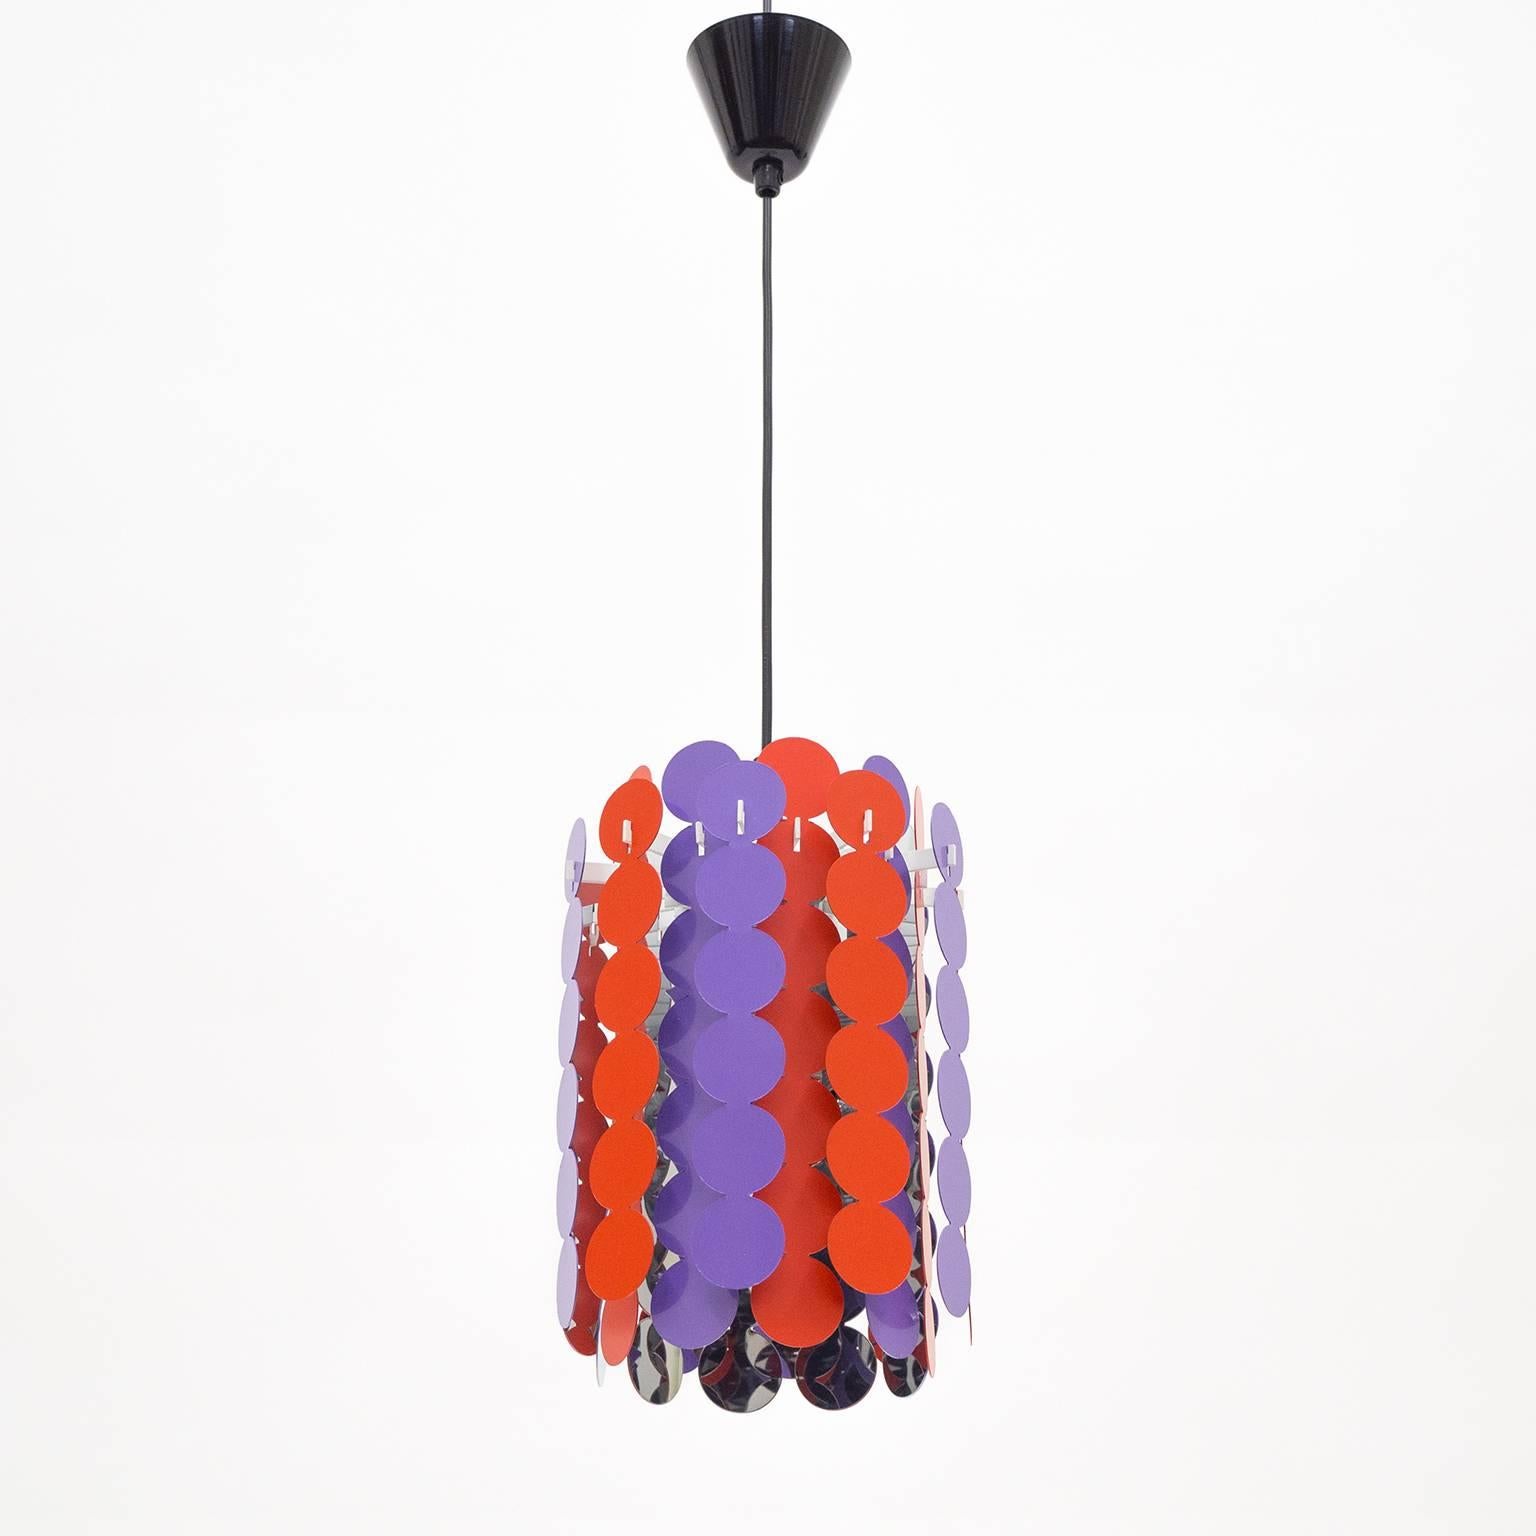 Absolute Sixties, this pendant by Doria is a truly rare find: Unused, this is in mint condition and comes with original box. 20 elements in red and purple surround a single E27 socket. Since the hanging elements are chromed on the inside the light